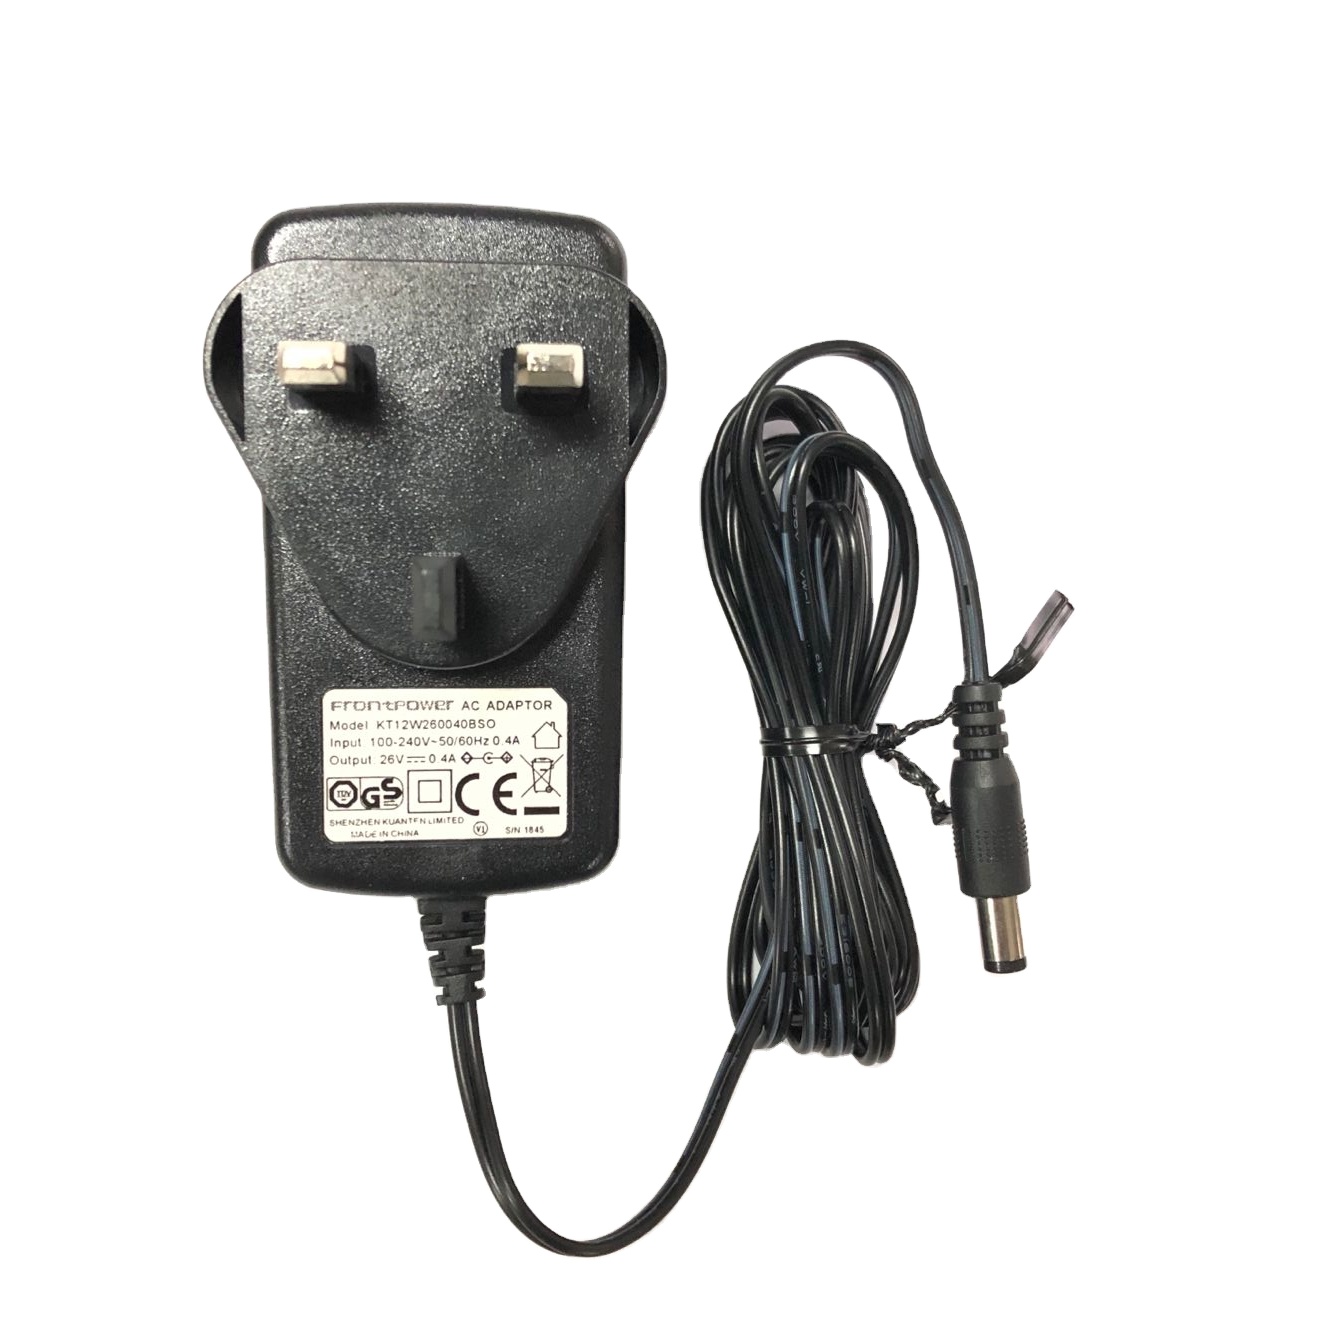 DC 26V 400MA 0.4A power adapter charger for Vax Slim Vac 22.2V  and Hoover freedom FD22 series charger